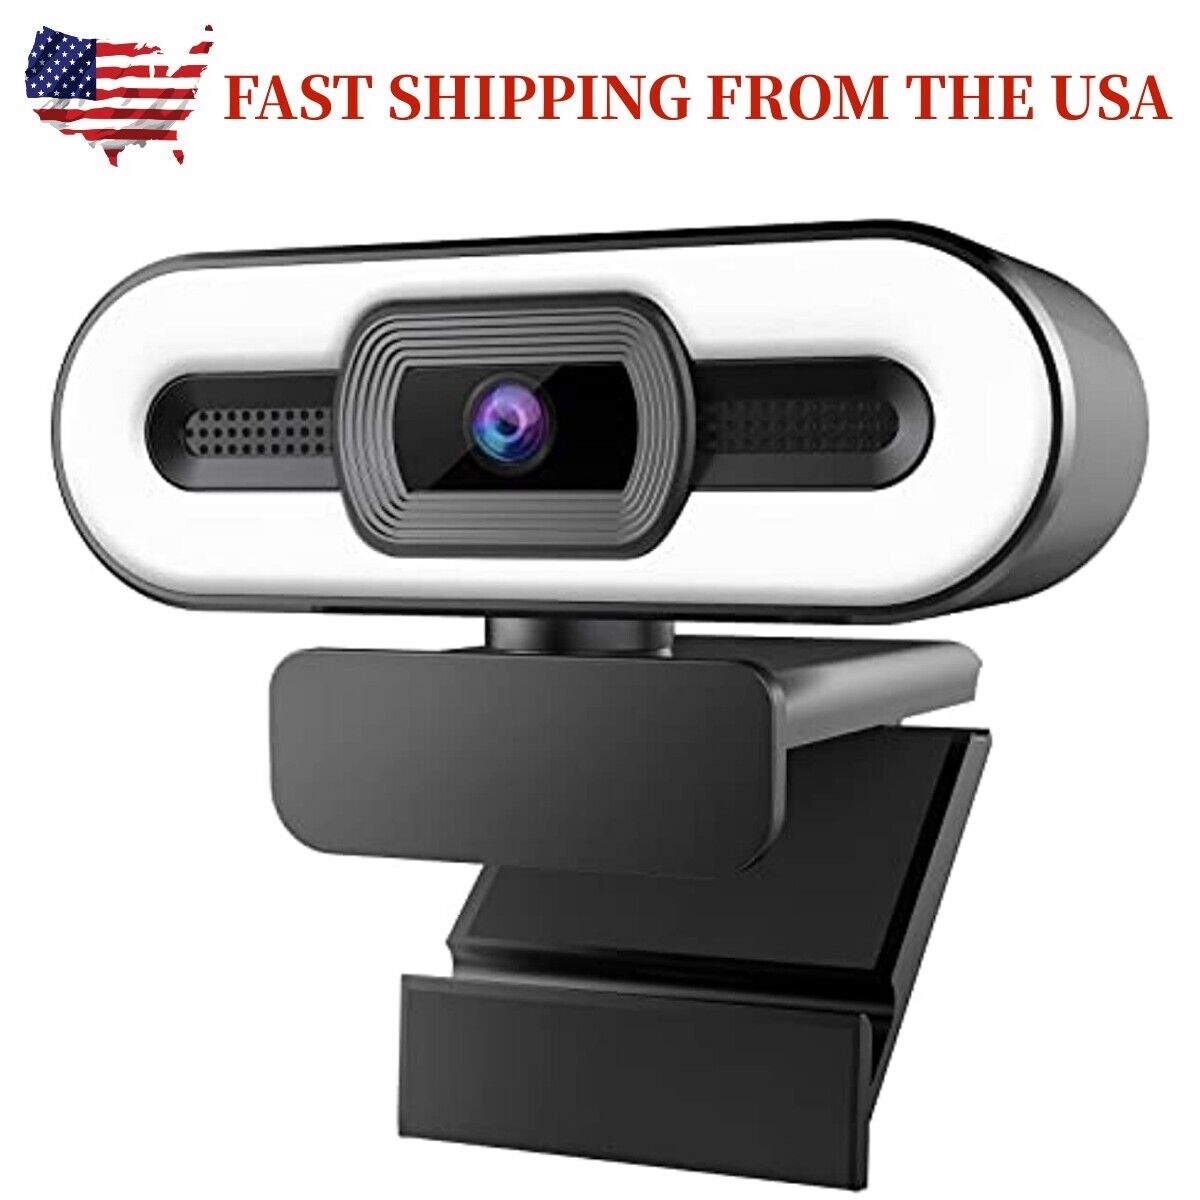 2K HD Web Camera with Microphone and Ring Light, Autofocus, Pro Gaming Webcam